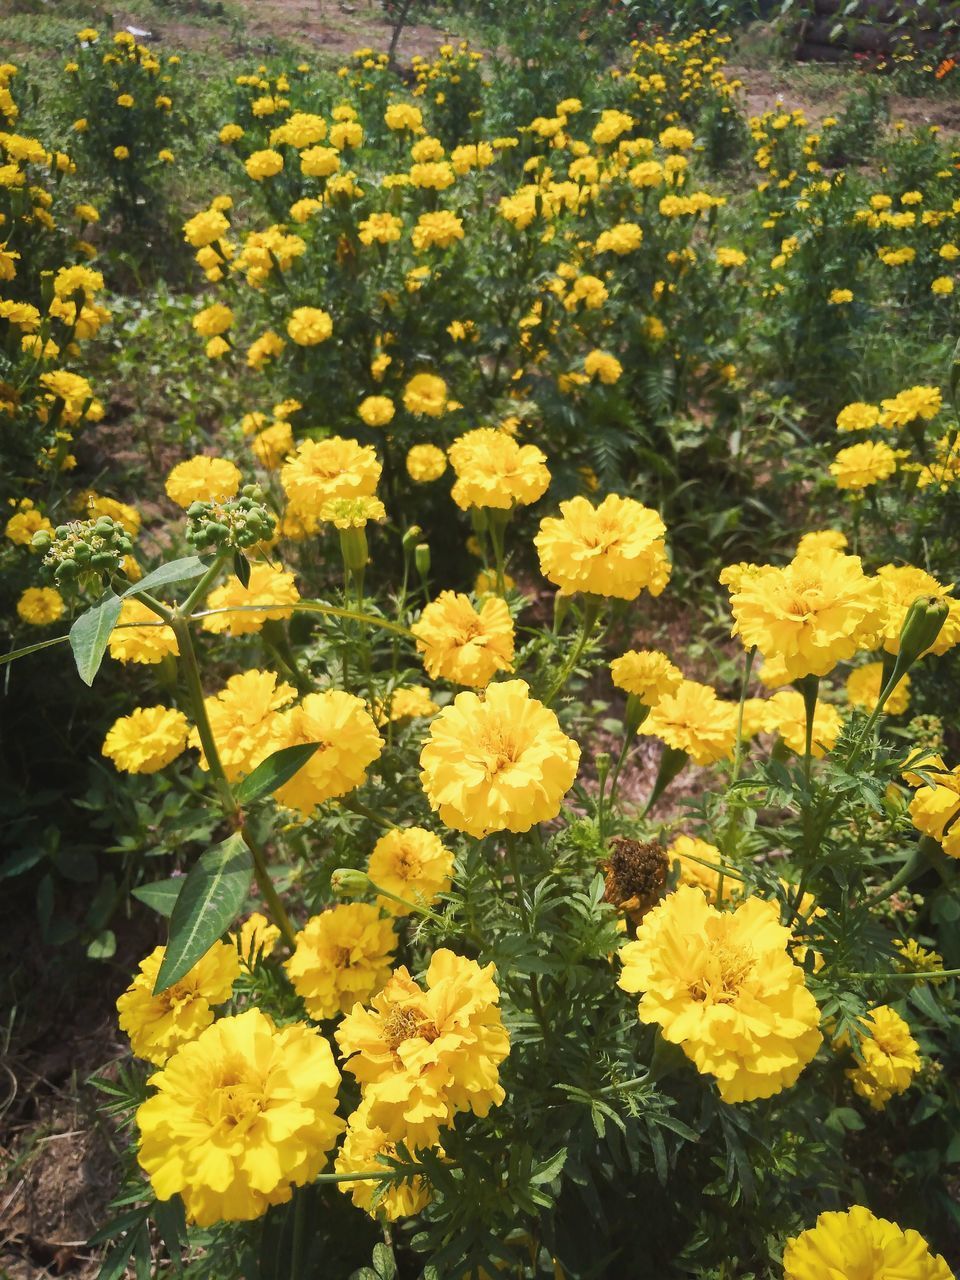 HIGH ANGLE VIEW OF YELLOW FLOWERING PLANTS IN FIELD